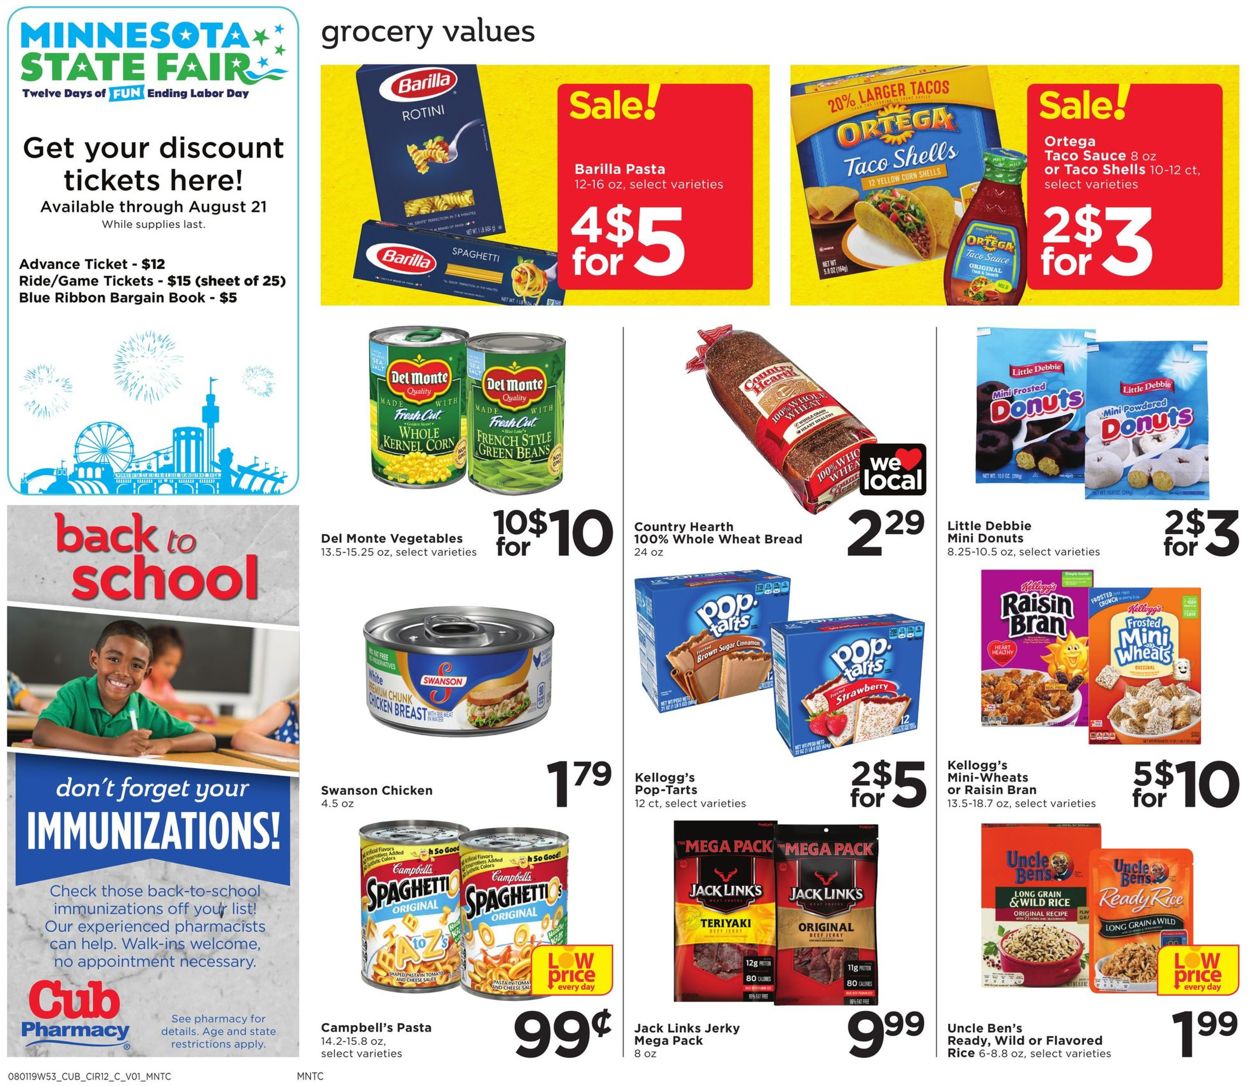 Cub Foods Current weekly ad 08/01 - 08/07/2019 [12] - www.bagssaleusa.com